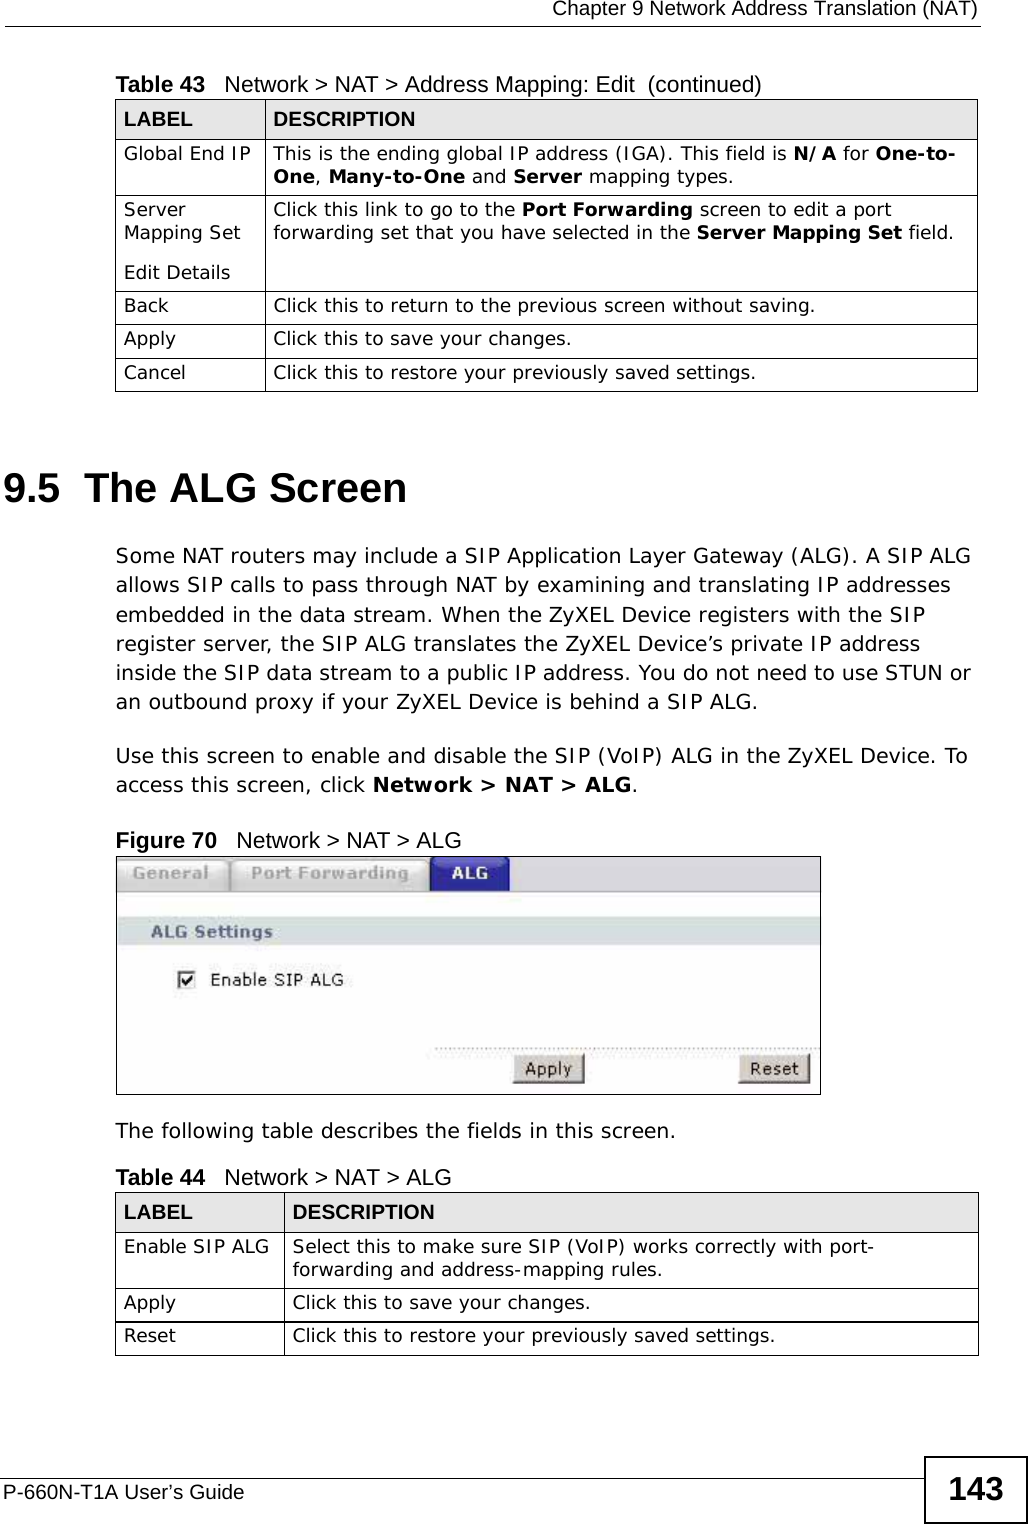  Chapter 9 Network Address Translation (NAT)P-660N-T1A User’s Guide 1439.5  The ALG ScreenSome NAT routers may include a SIP Application Layer Gateway (ALG). A SIP ALG allows SIP calls to pass through NAT by examining and translating IP addresses embedded in the data stream. When the ZyXEL Device registers with the SIP register server, the SIP ALG translates the ZyXEL Device’s private IP address inside the SIP data stream to a public IP address. You do not need to use STUN or an outbound proxy if your ZyXEL Device is behind a SIP ALG.Use this screen to enable and disable the SIP (VoIP) ALG in the ZyXEL Device. To access this screen, click Network &gt; NAT &gt; ALG.Figure 70   Network &gt; NAT &gt; ALGThe following table describes the fields in this screen.Global End IP This is the ending global IP address (IGA). This field is N/A for One-to-One, Many-to-One and Server mapping types.Server Mapping SetEdit DetailsClick this link to go to the Port Forwarding screen to edit a port forwarding set that you have selected in the Server Mapping Set field.Back Click this to return to the previous screen without saving.Apply Click this to save your changes.Cancel Click this to restore your previously saved settings.Table 43   Network &gt; NAT &gt; Address Mapping: Edit  (continued)LABEL DESCRIPTIONTable 44   Network &gt; NAT &gt; ALGLABEL DESCRIPTIONEnable SIP ALG Select this to make sure SIP (VoIP) works correctly with port-forwarding and address-mapping rules.Apply Click this to save your changes.Reset Click this to restore your previously saved settings.